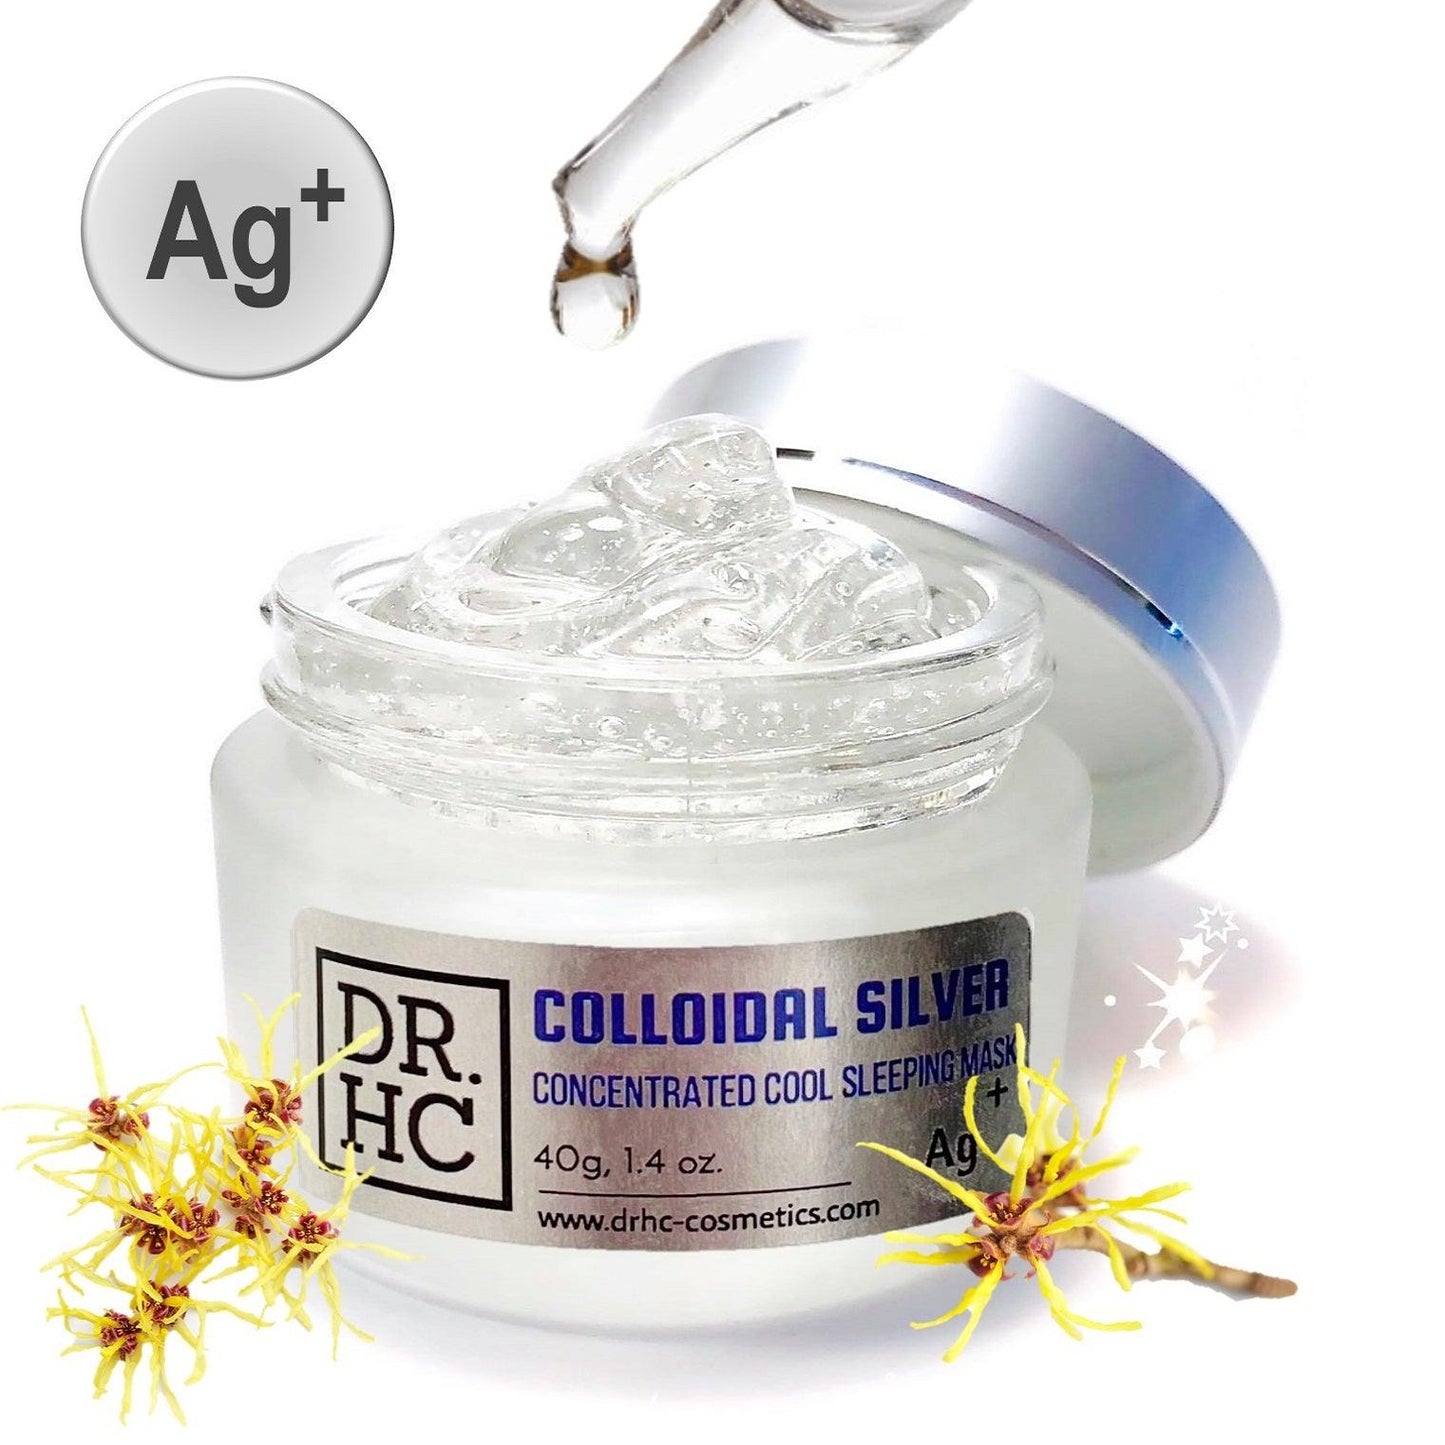 DR.HC Colloidal Silver Concentrated Cool Sleeping Mask (25~40g, 0.9~1.4oz) (Anti-acne, Anti-scar, Anti-blemish, Skin recovery...)